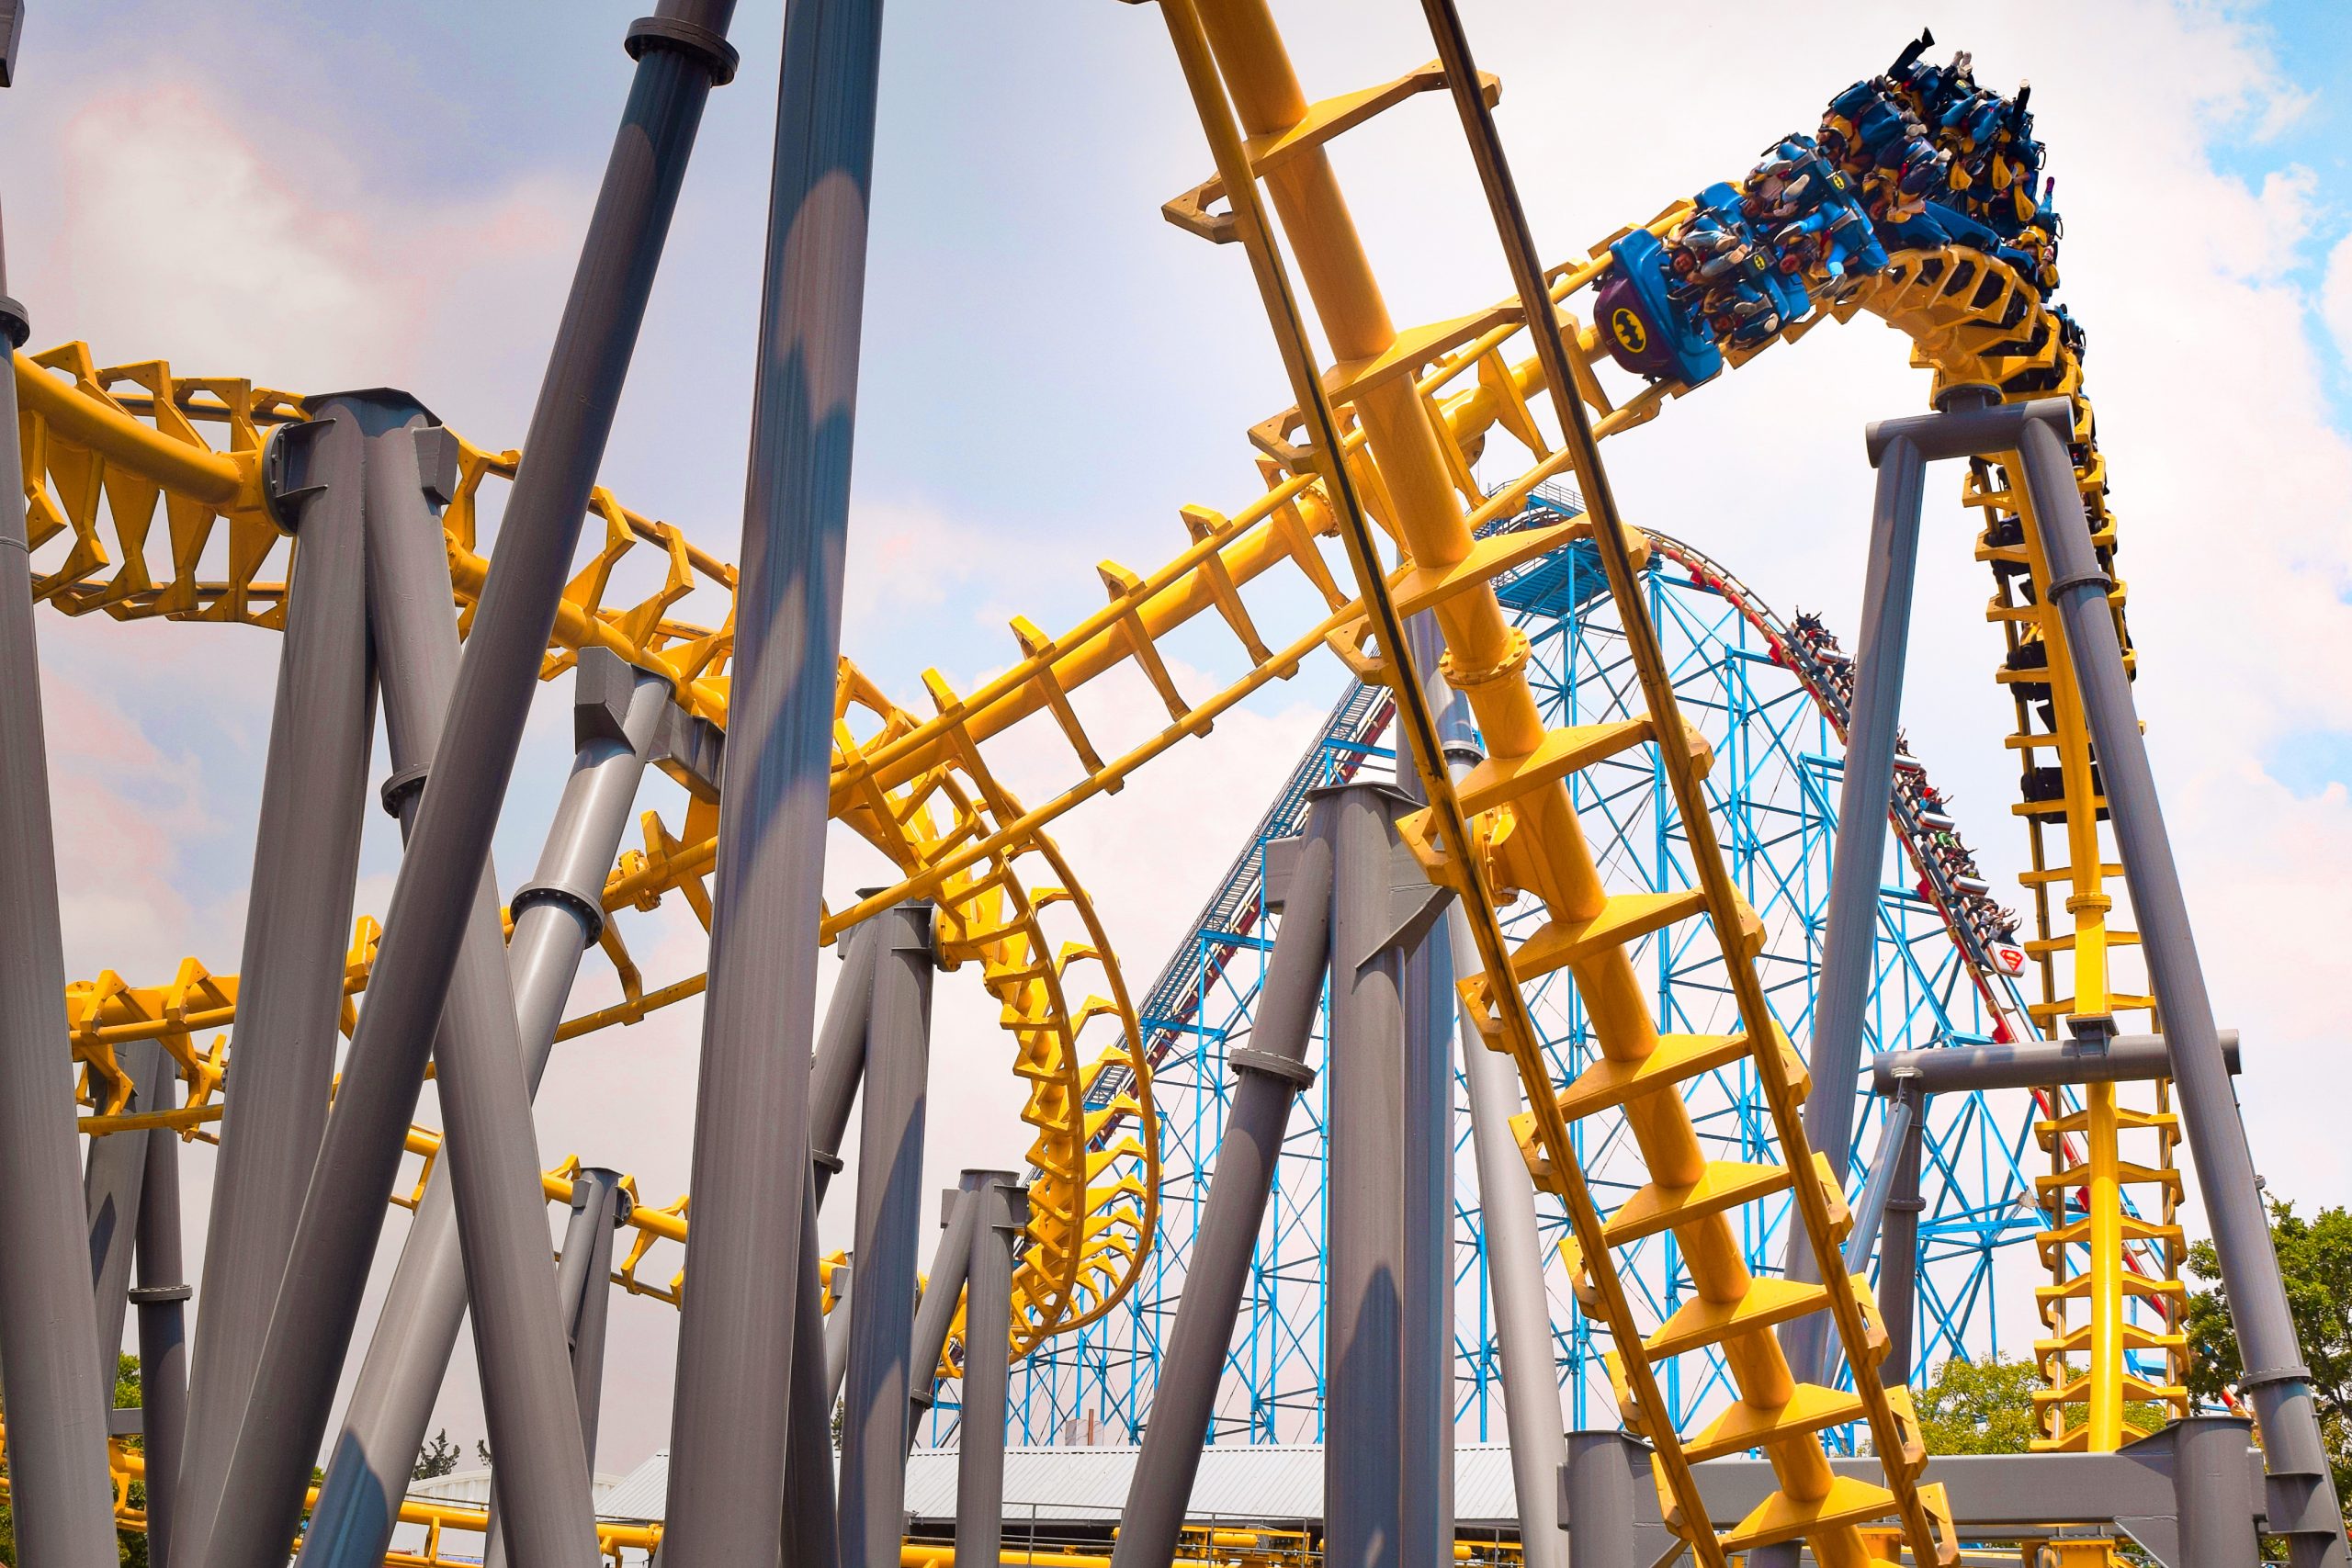 All 15 Six Flags Great Adventure roller coasters ranked from worst